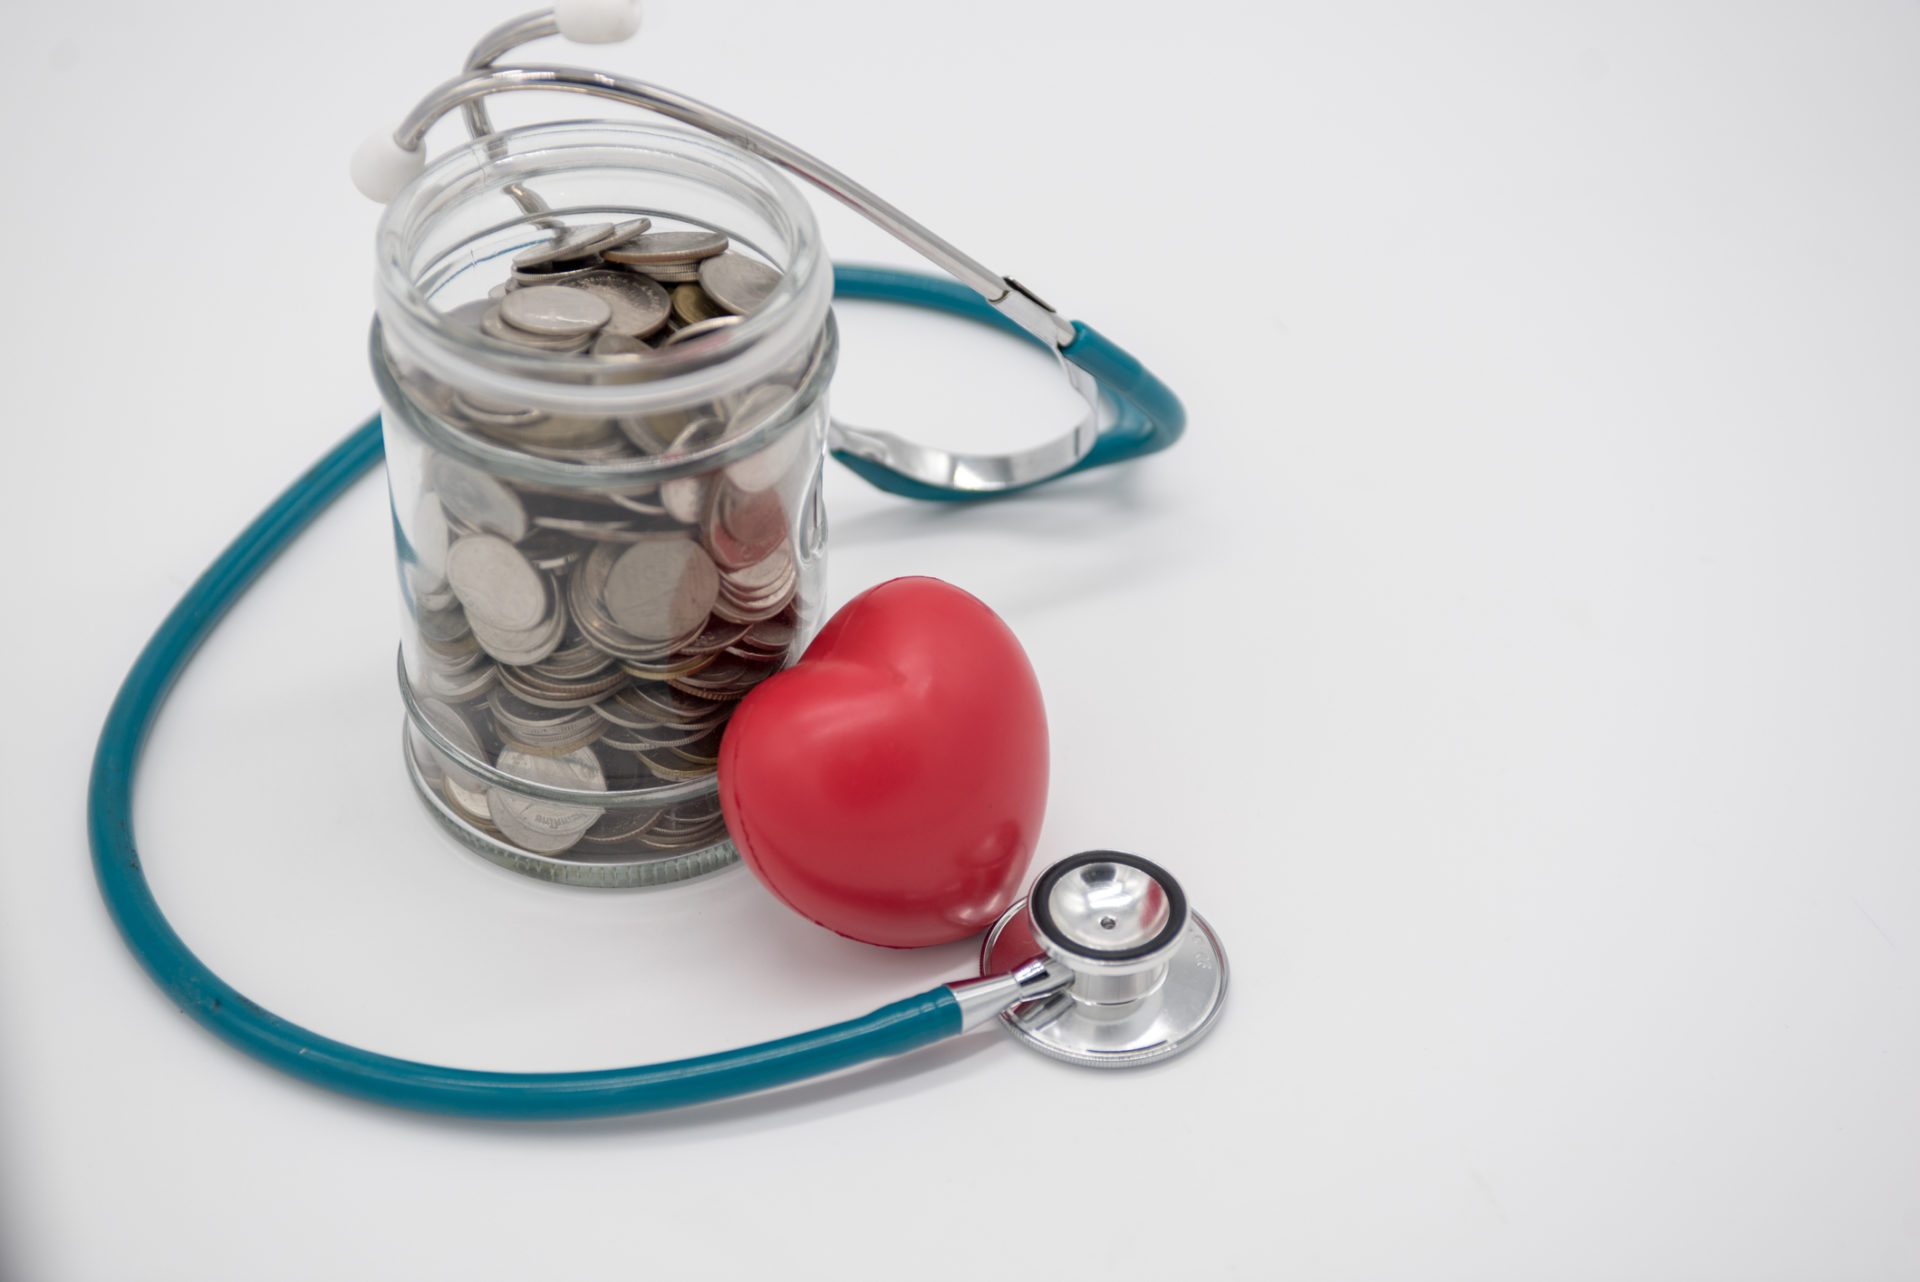 a jar filled with coins enclosed by stethoscope and a small red heart-shaped object placed near a jar